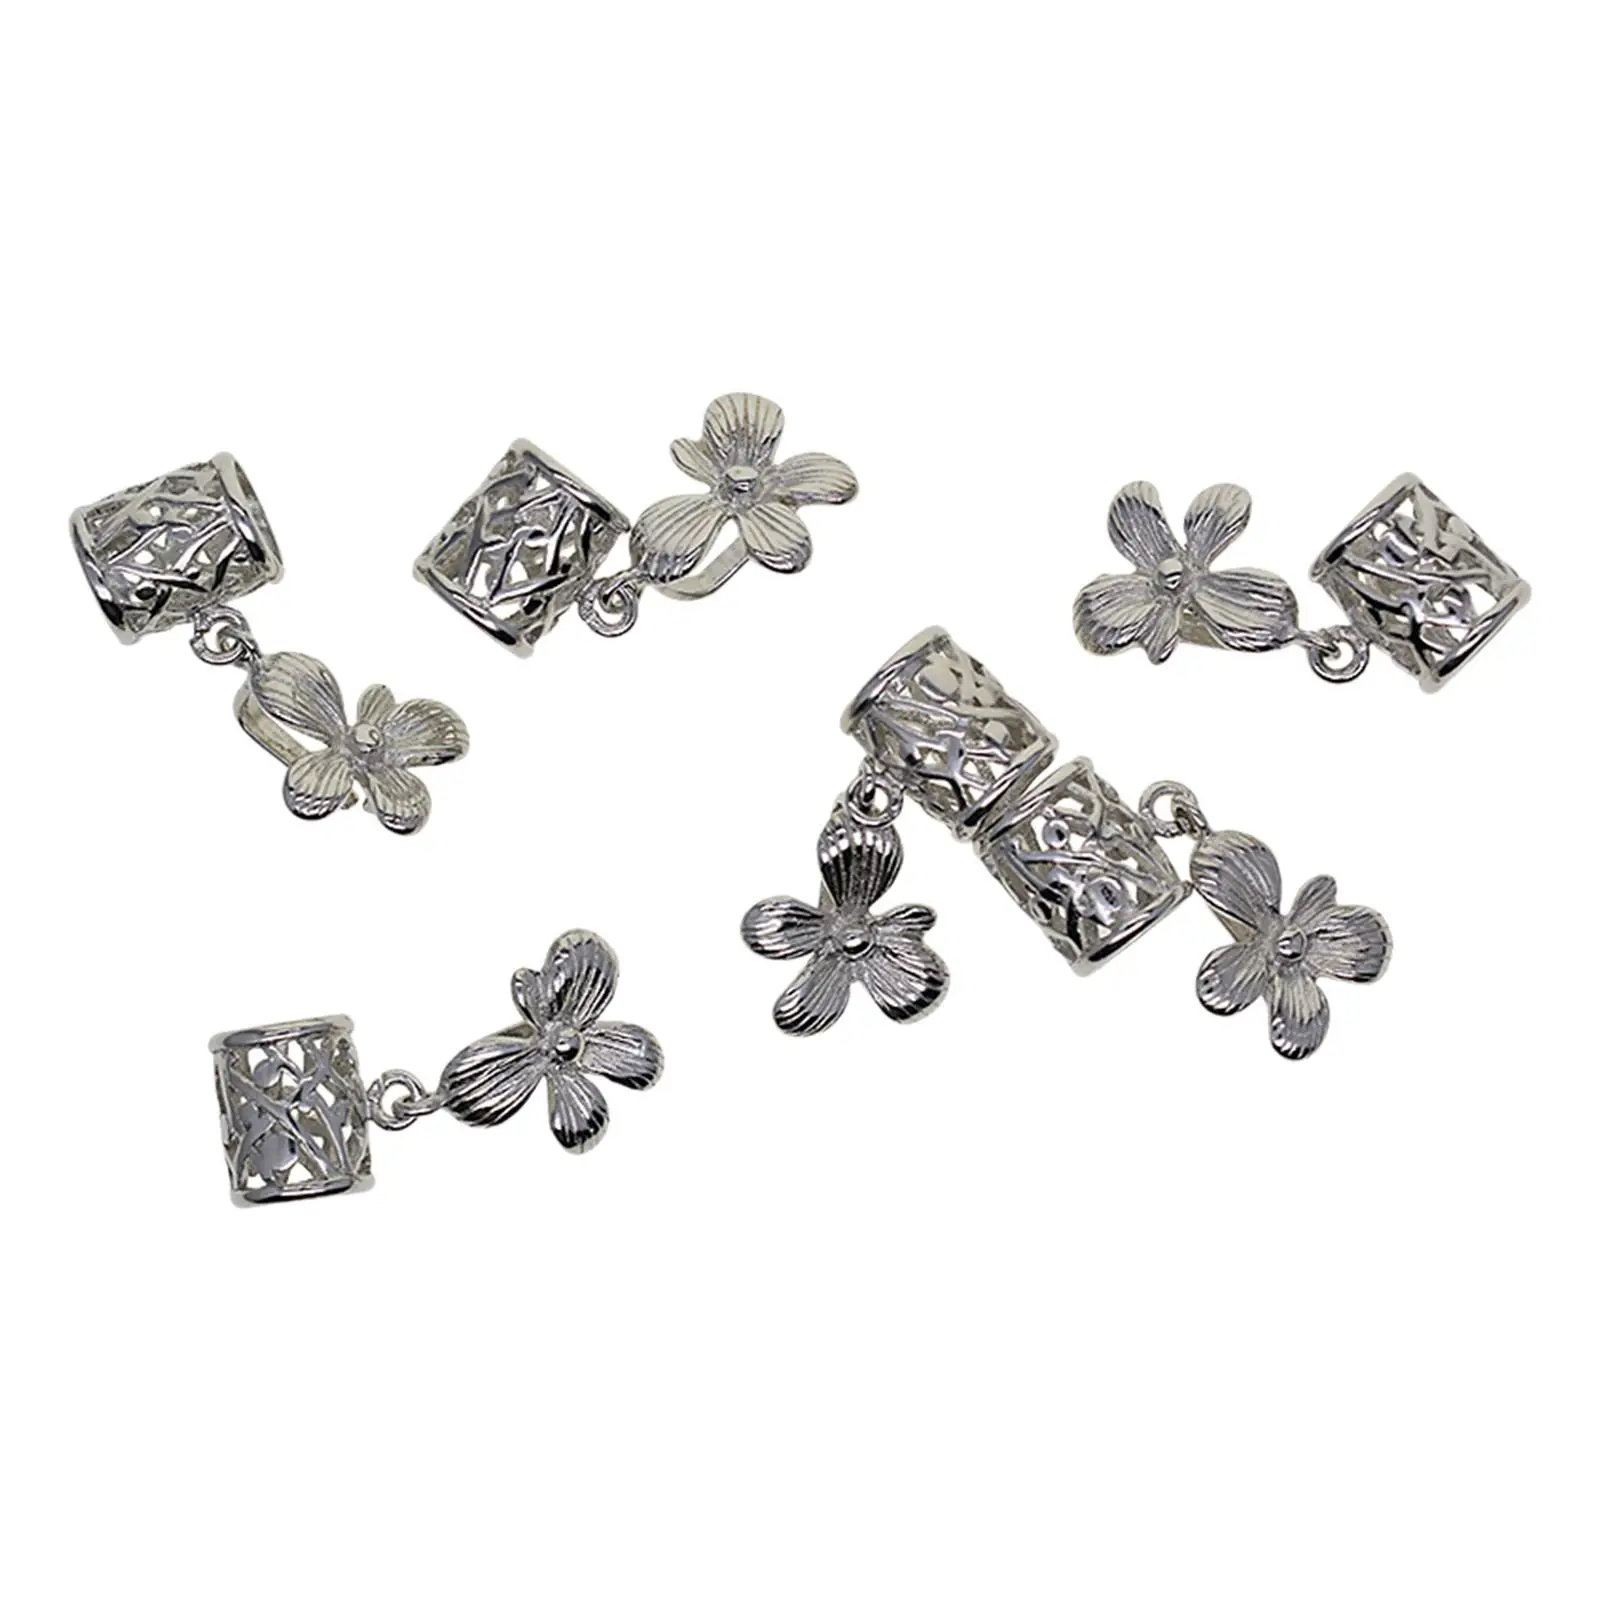 6 Pieces Metal Pinch Bails Pinch Clips Bails Bead Hanger Links Pendant Bails for Jewelry Findings Supplies Charm DIY Supplies